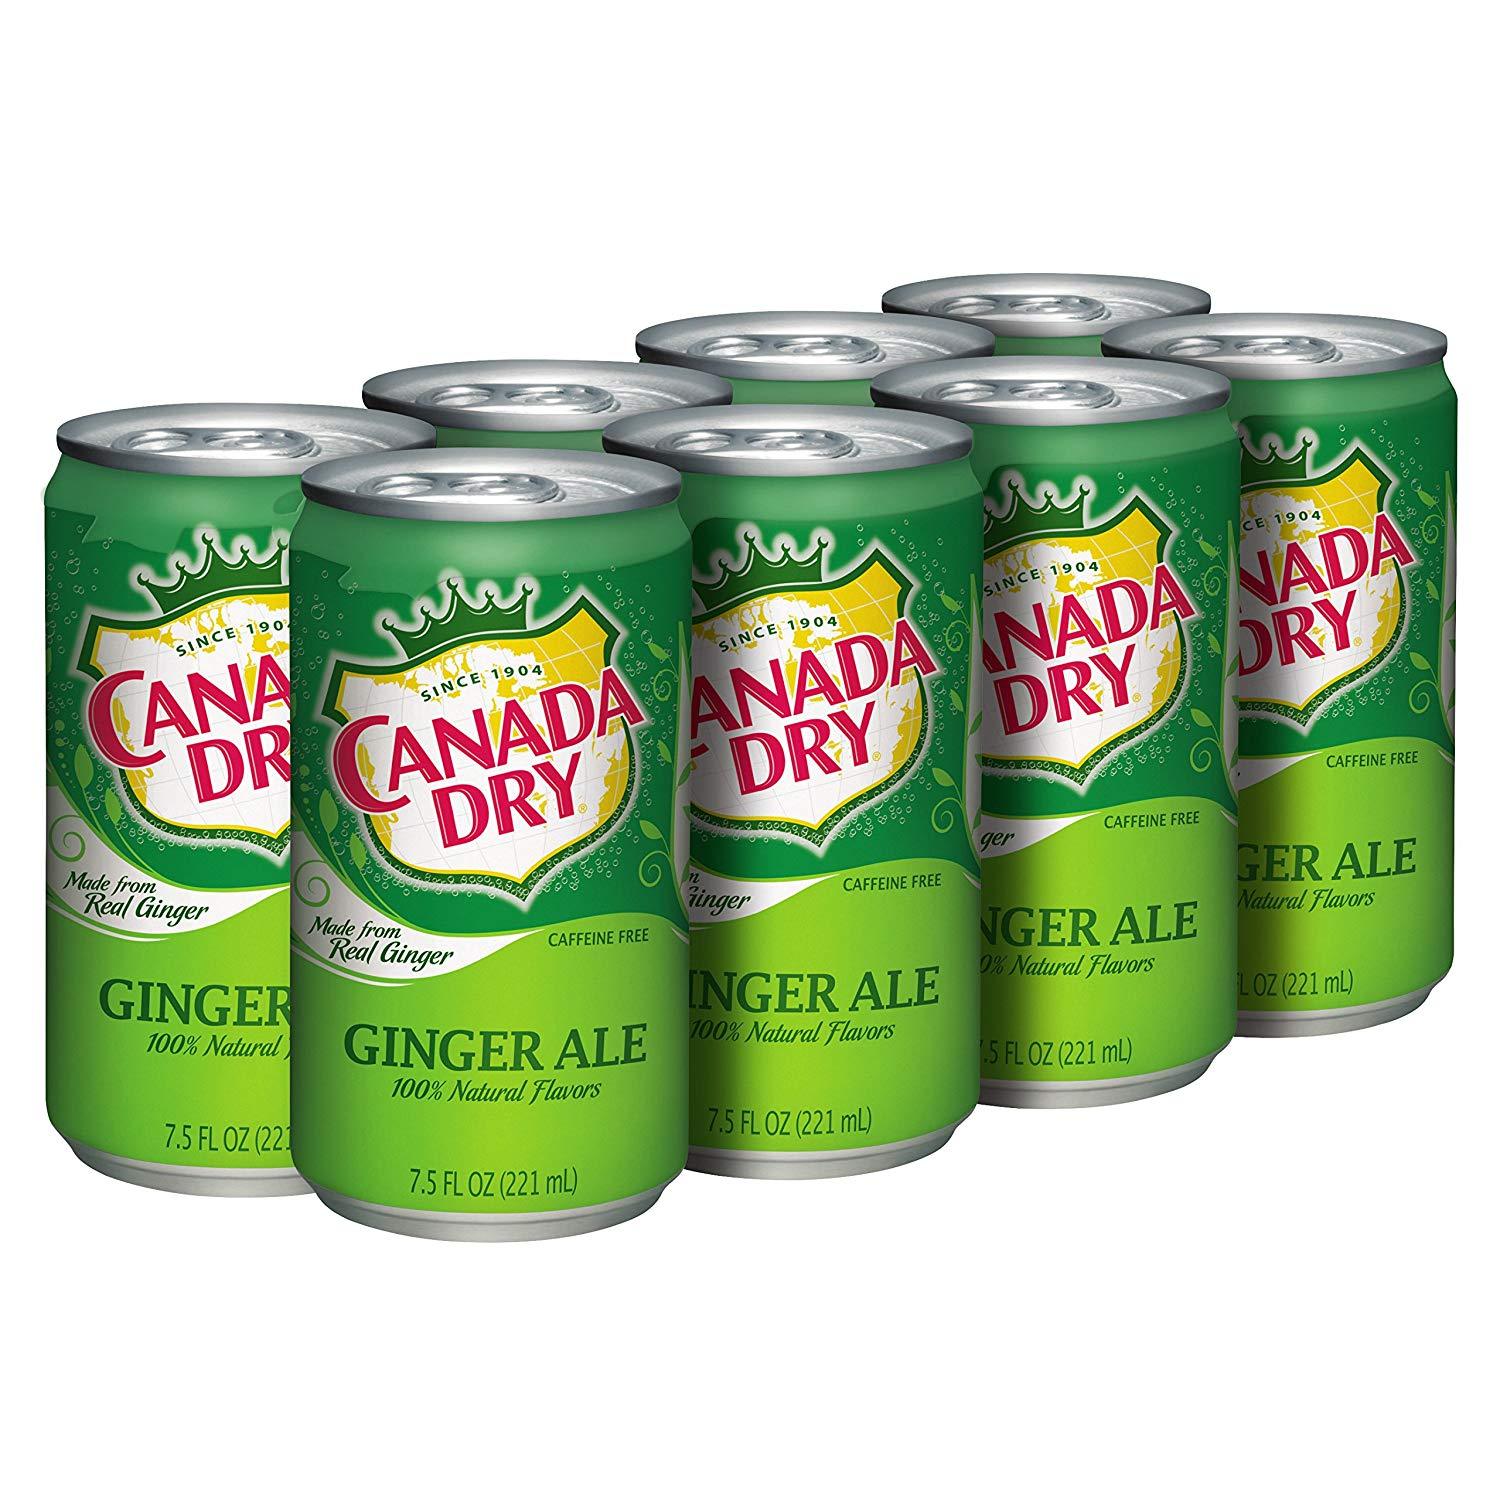 bvi>Canada Dry Ginger Ale, 12 oz (355 ml) 6 pk cans